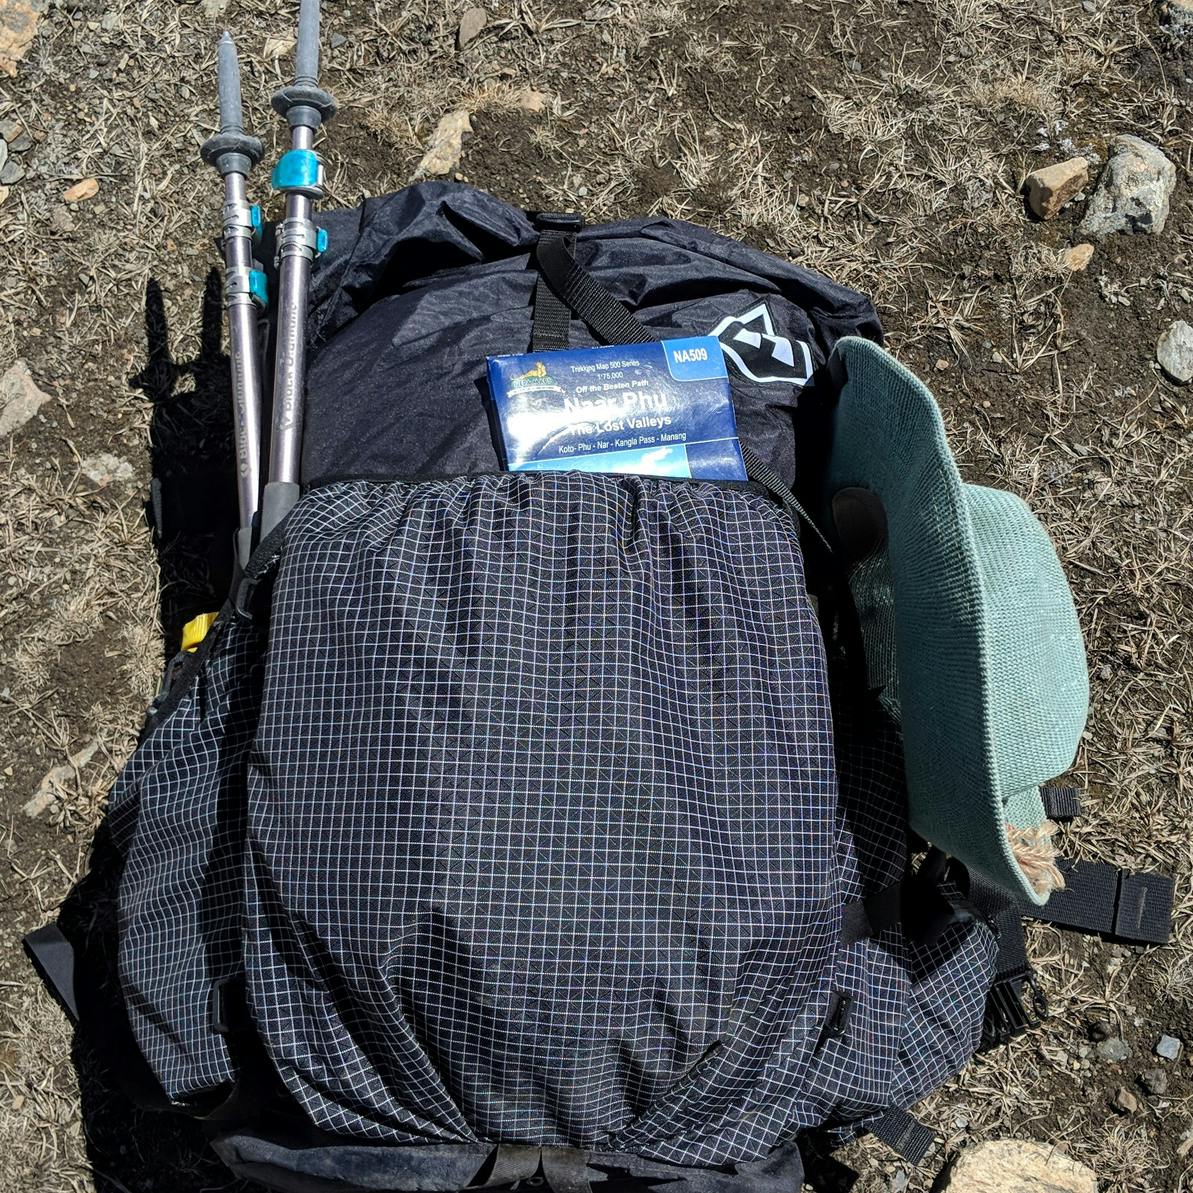 Backpack filled with the necessary equipment for hiking and backpacking